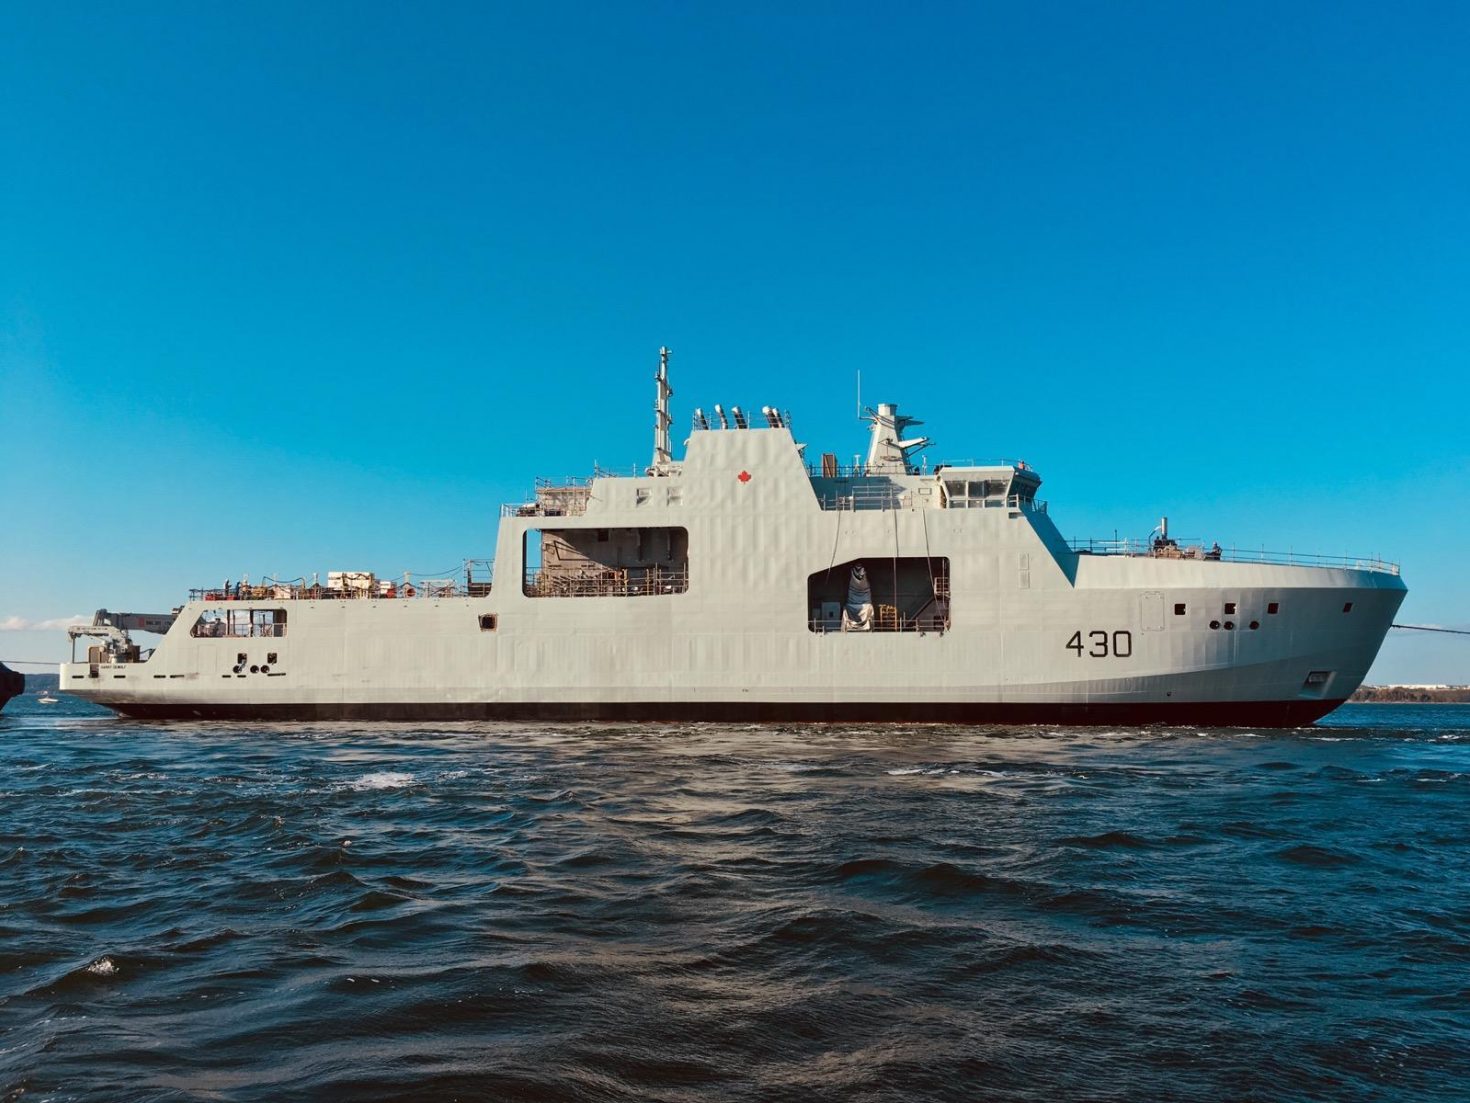 Canada's first Arctic and offshore patrol ship launched